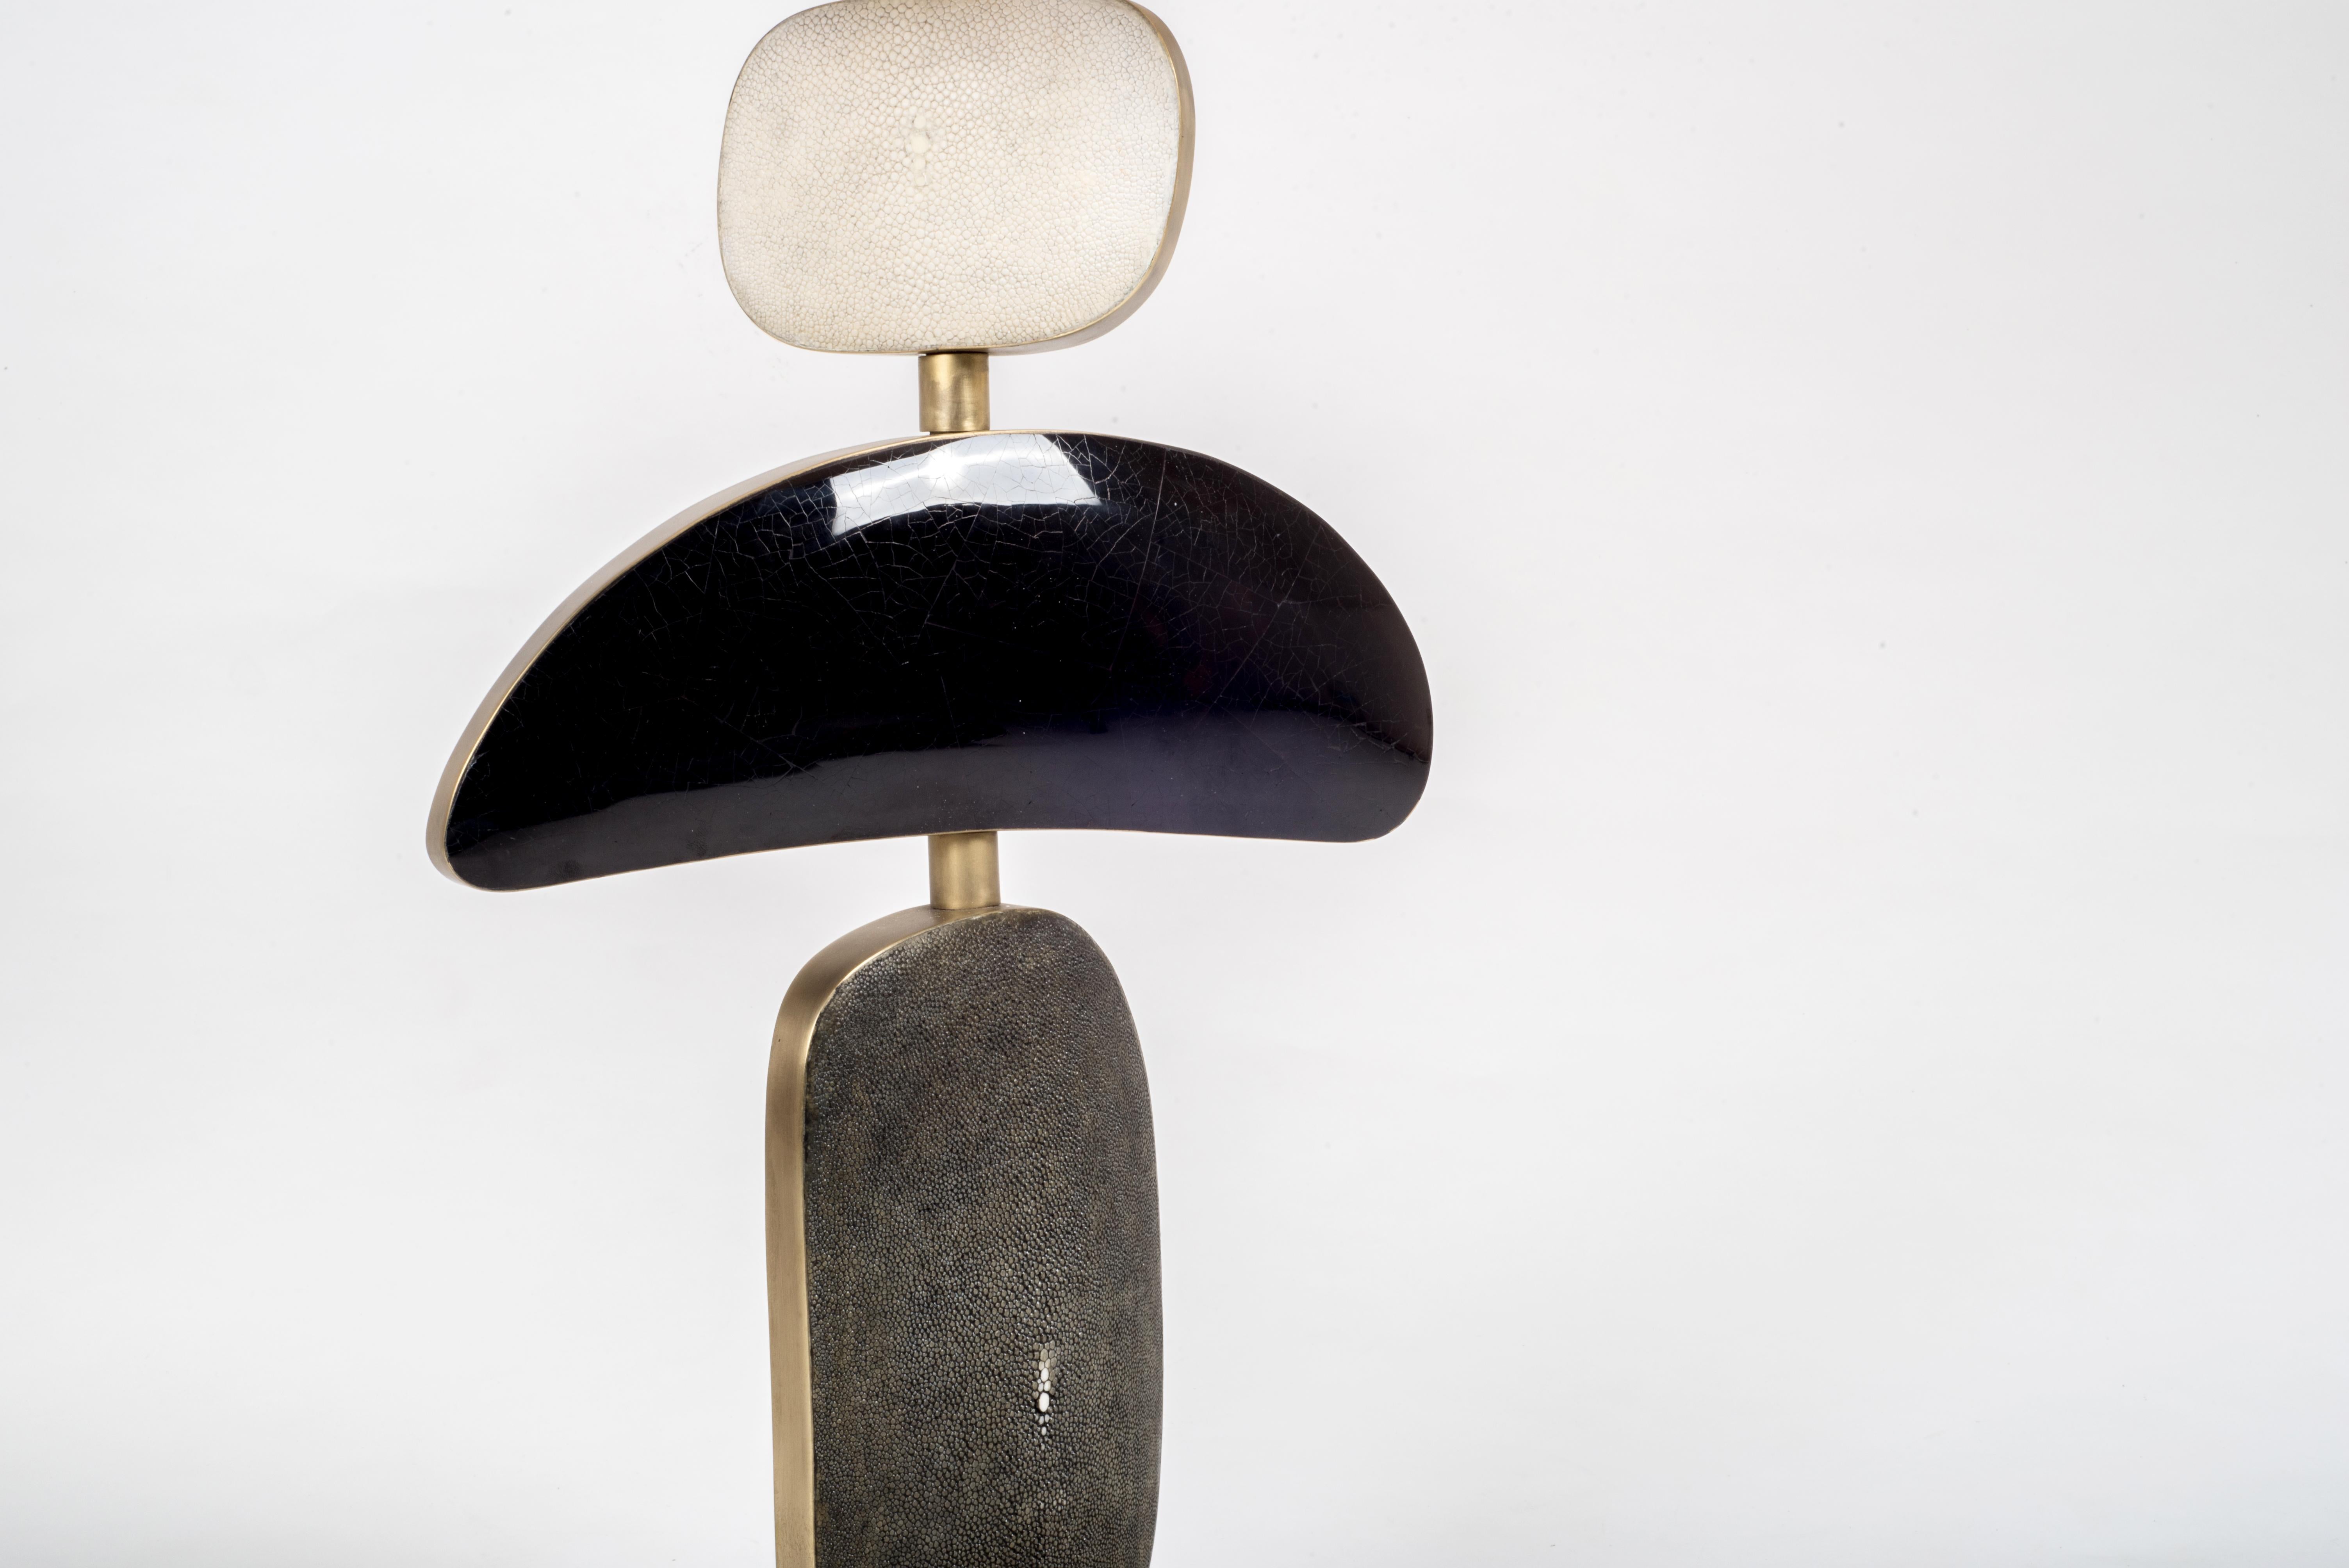 The Cosmo table lamp by Kifu Paris is a whimsical and sculptural piece, inlaid cream, black shell and coal black shagreen with bronze-patina brass accents. The amorphous shapes on the bottom part can be moved to adjust the angle of each part.